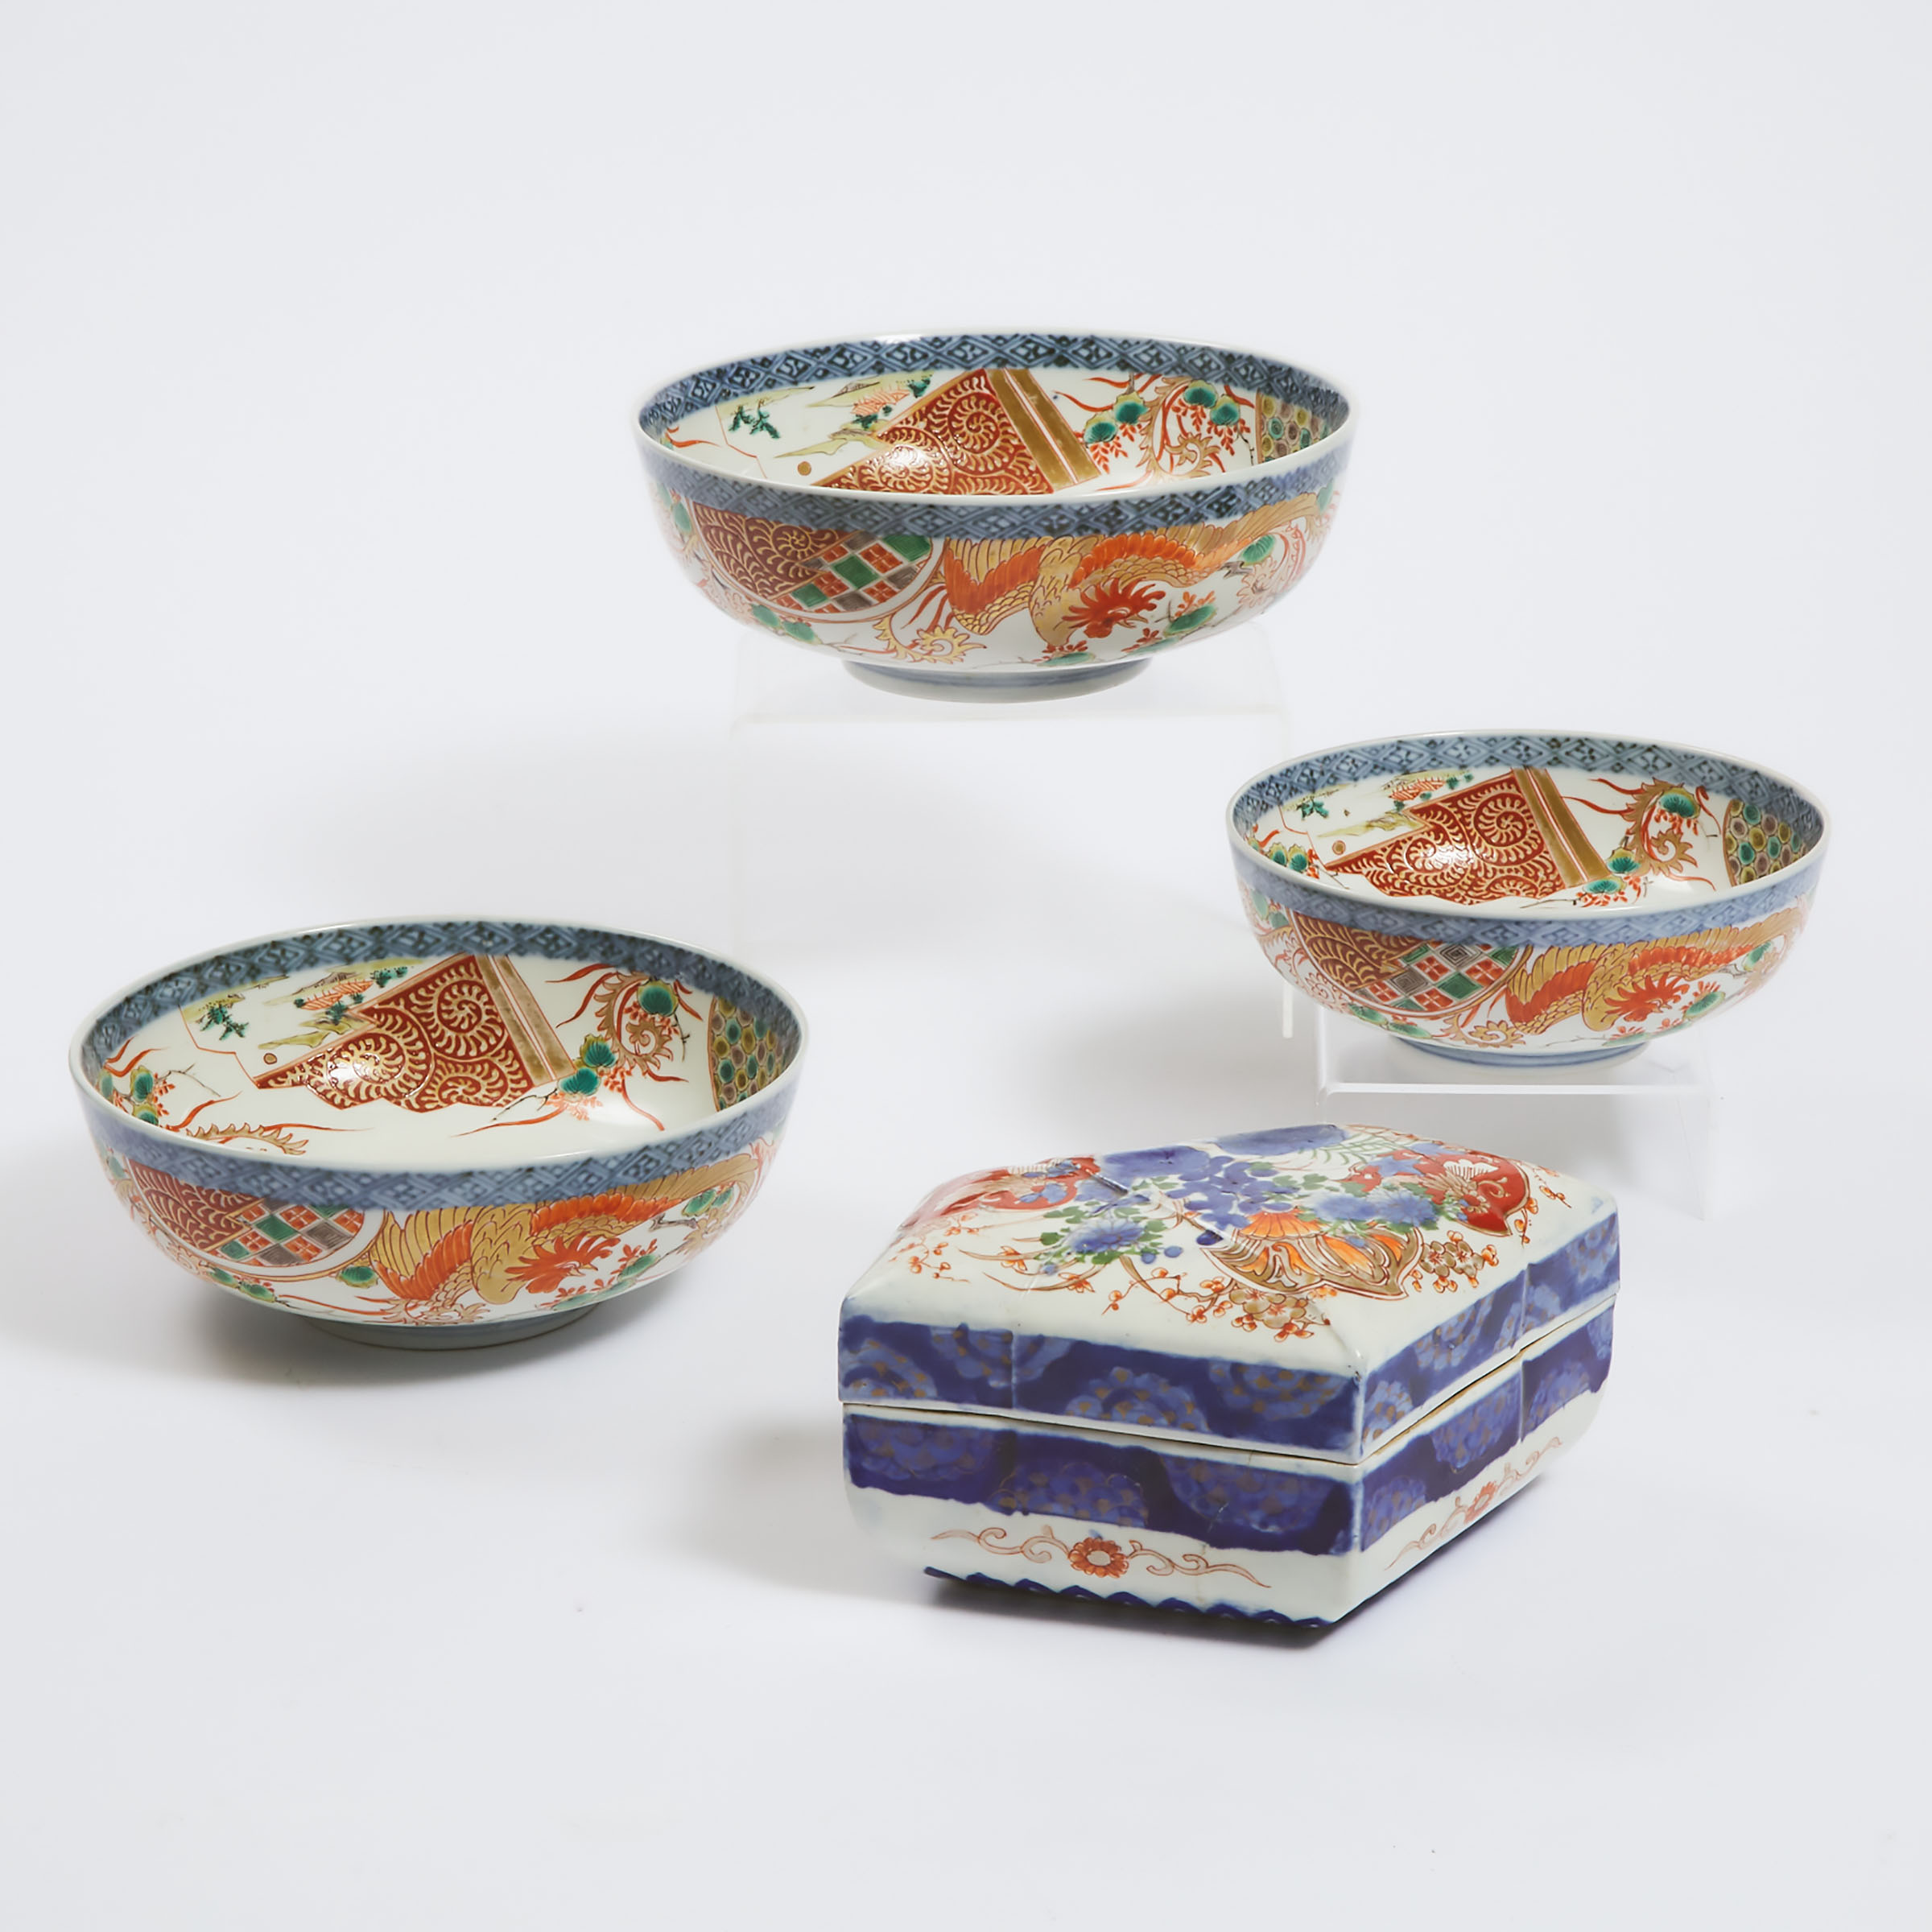 A Set of Three Imari Porcelain Nesting Bowls, Together With an Unusual-Shaped Porcelain Box, Meiji Period, Late 19th/Early 20th Century